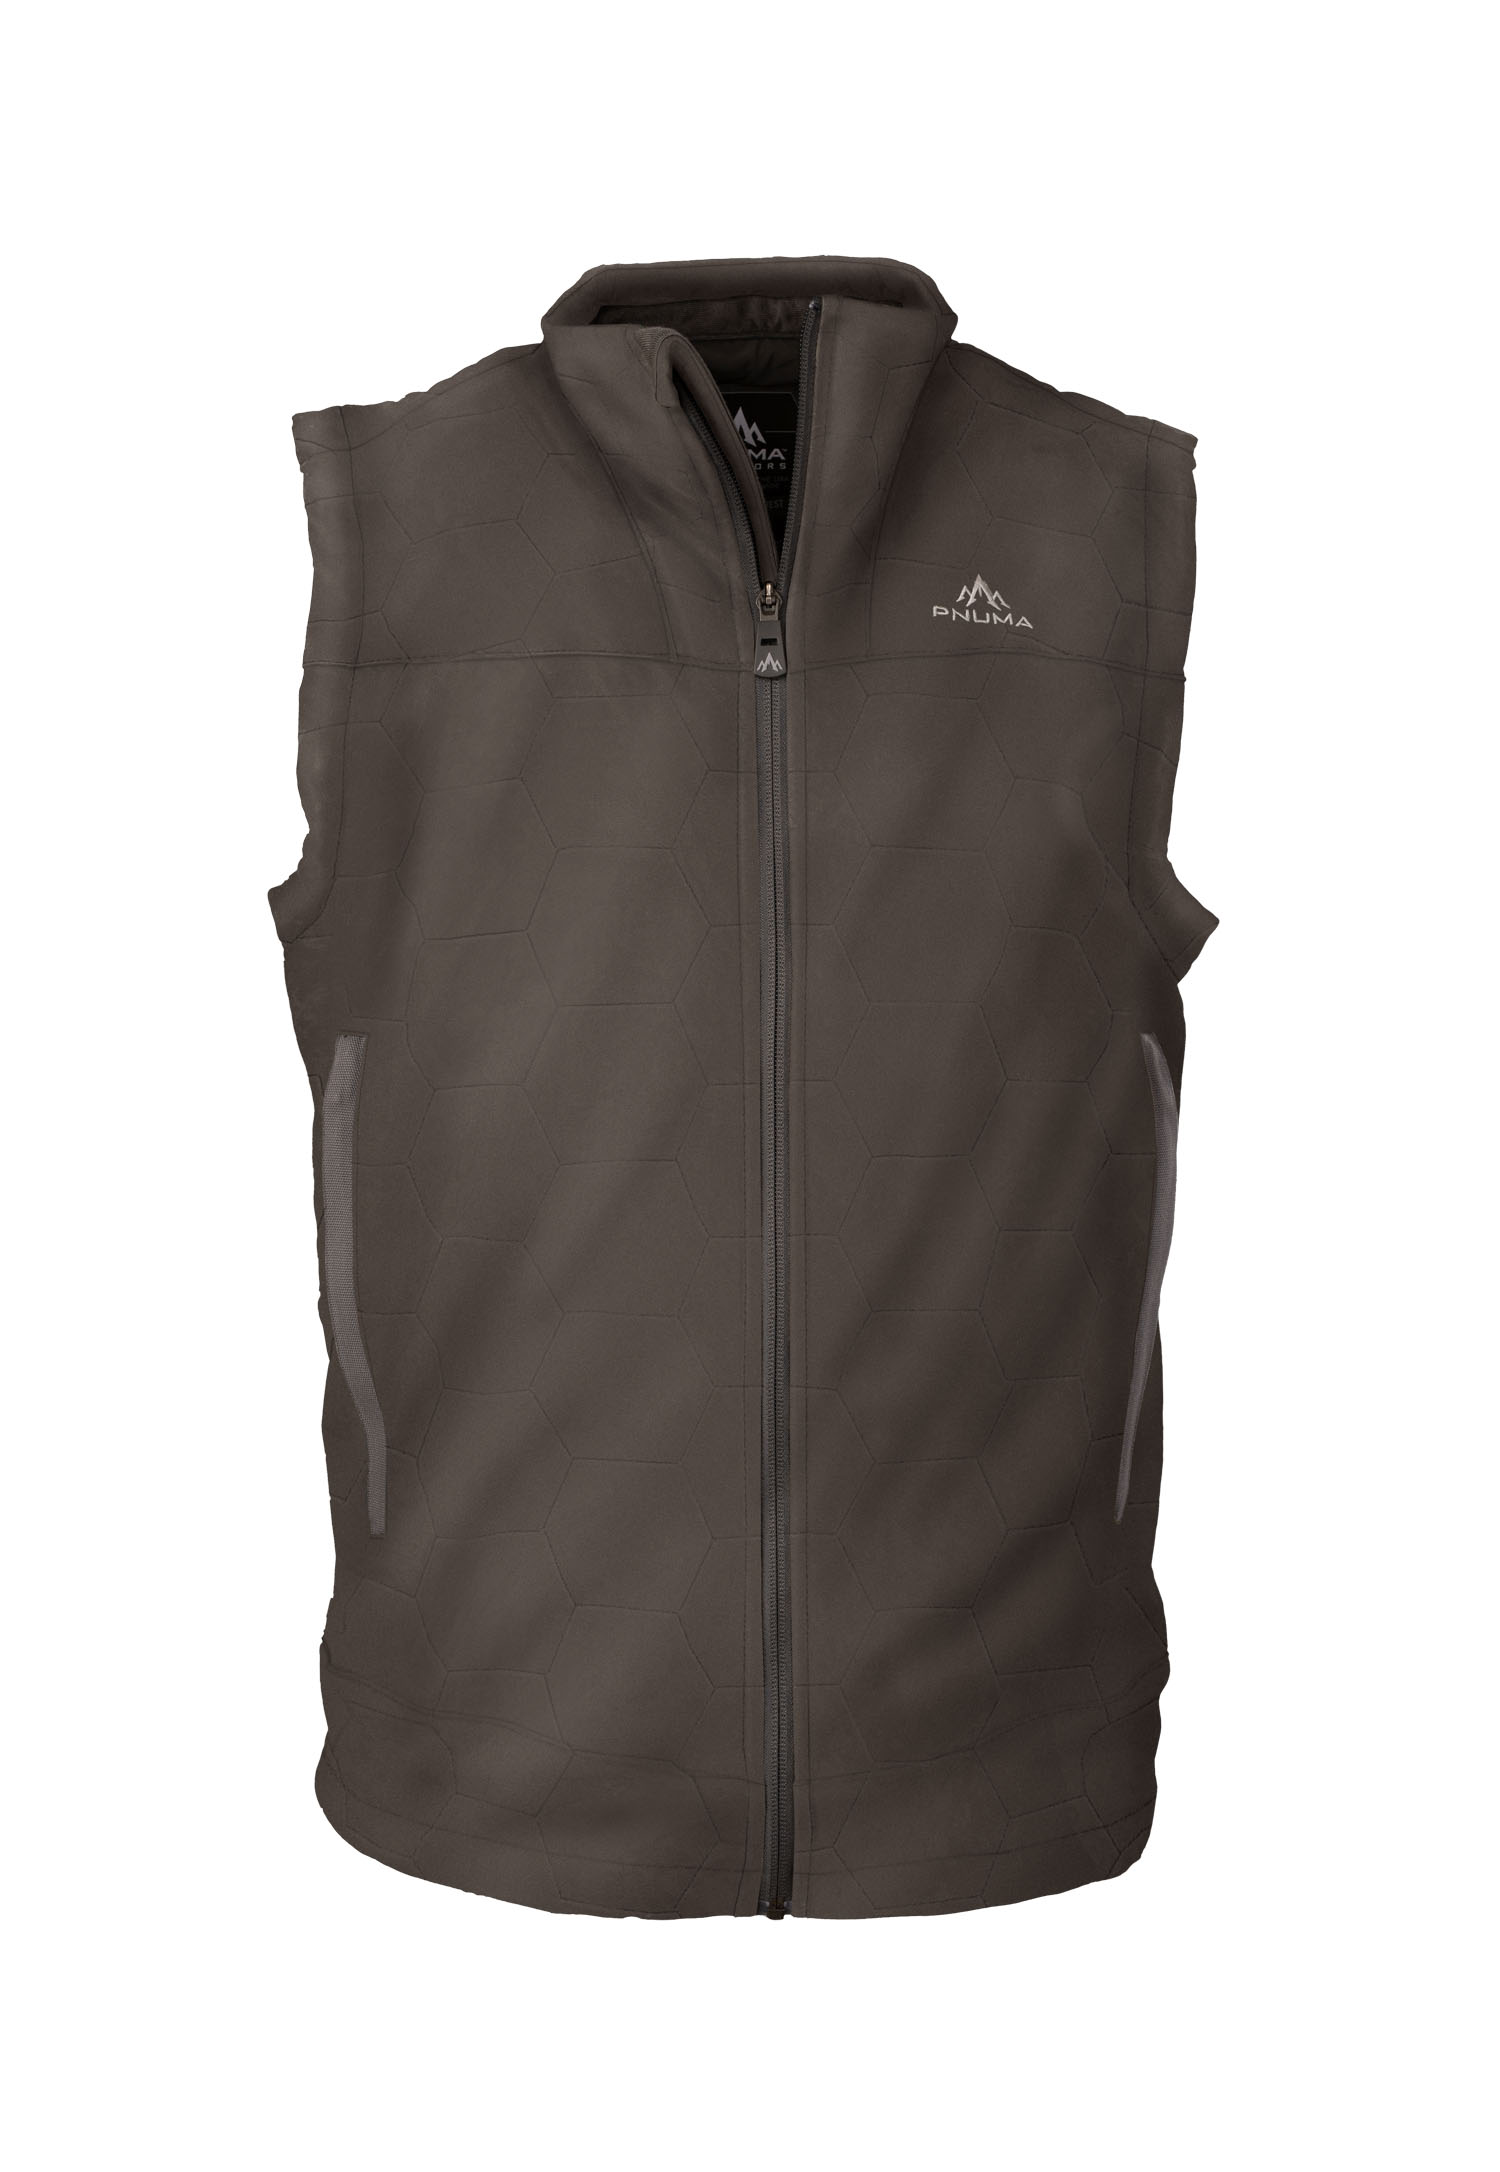 The Solids Collection - Pnuma Outdoors